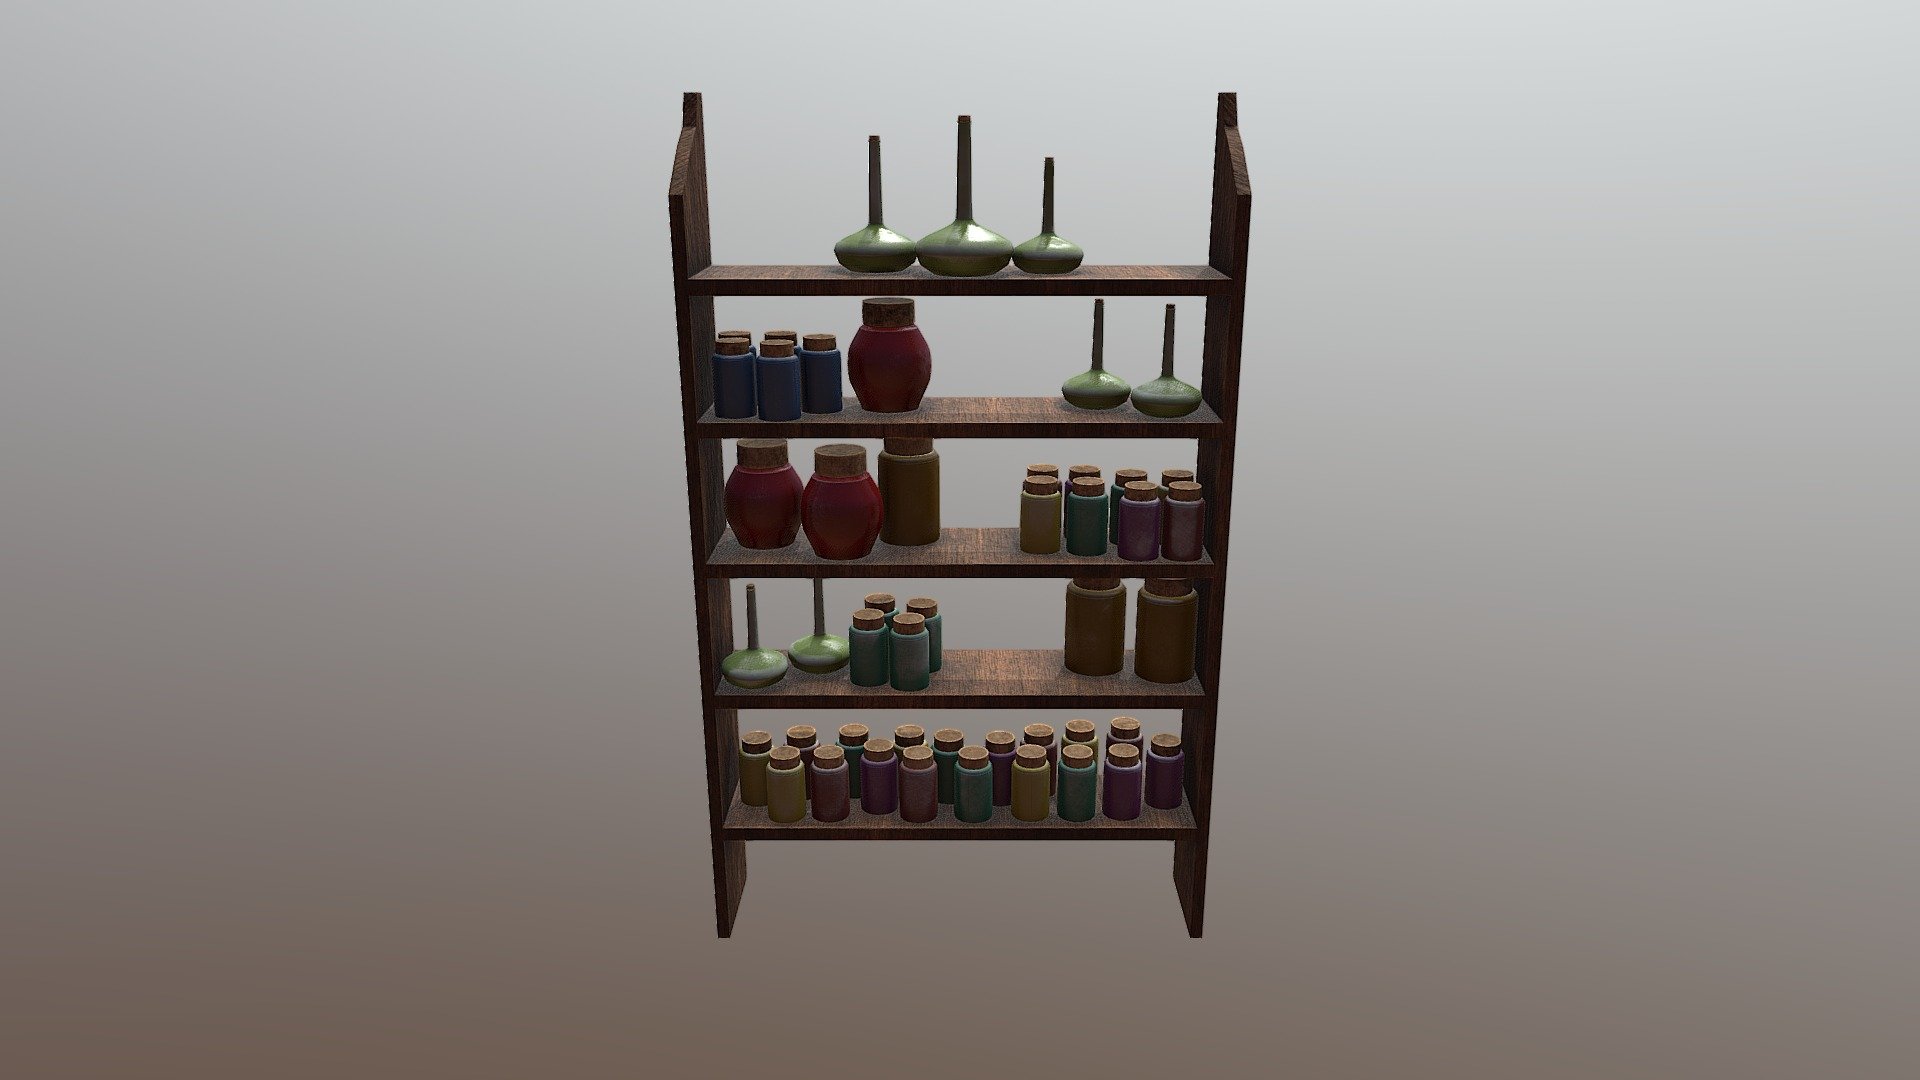 This is a set of assets I created in my spare time. I based the potions bottles off of an asset I created during the summer for a college project. I created this with Maya and textured it in Substance Painter - Potion Shelf - 3D model by Killband 3d model